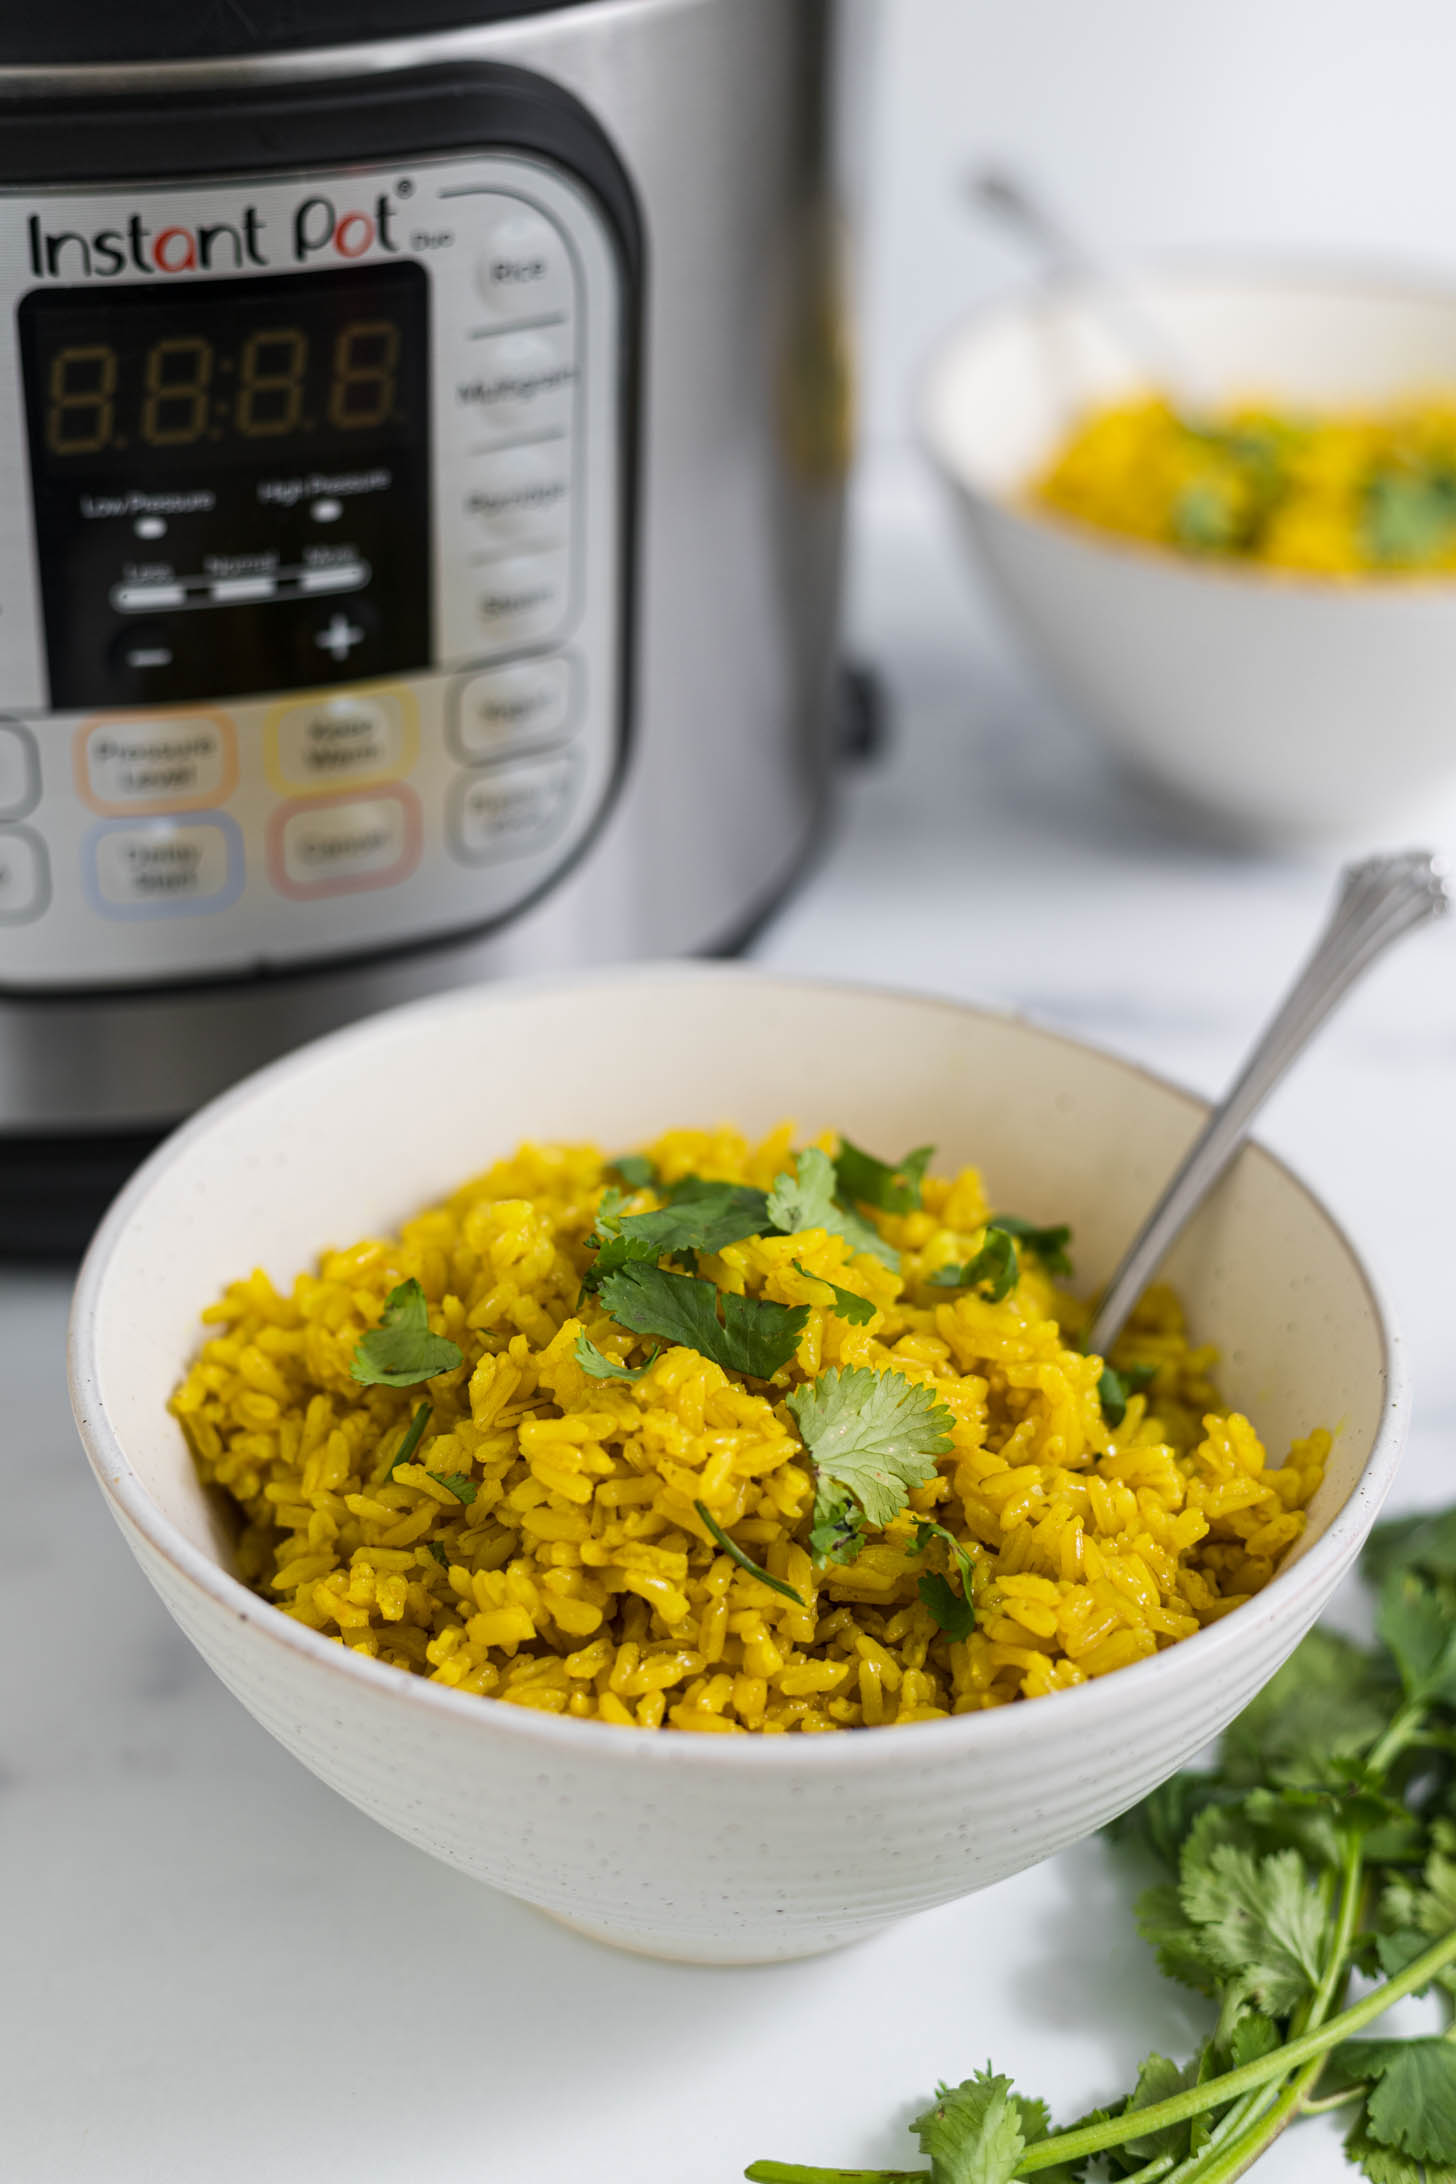 A bowl of turmeric rice with an instant pot behind it.